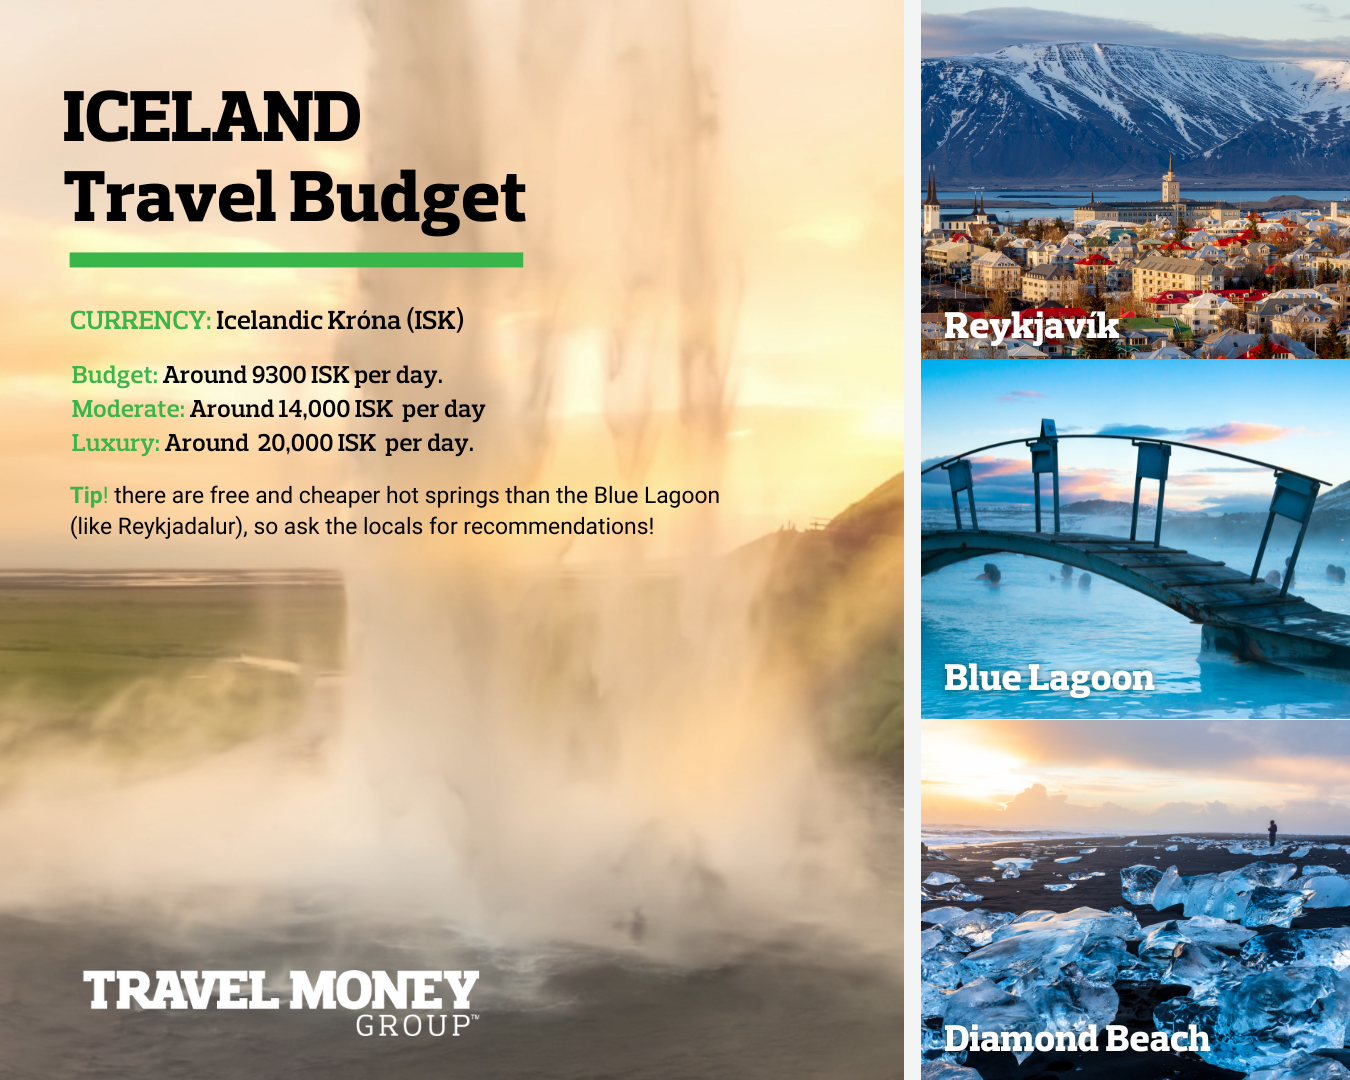 Iceland Travel Budget Infographic